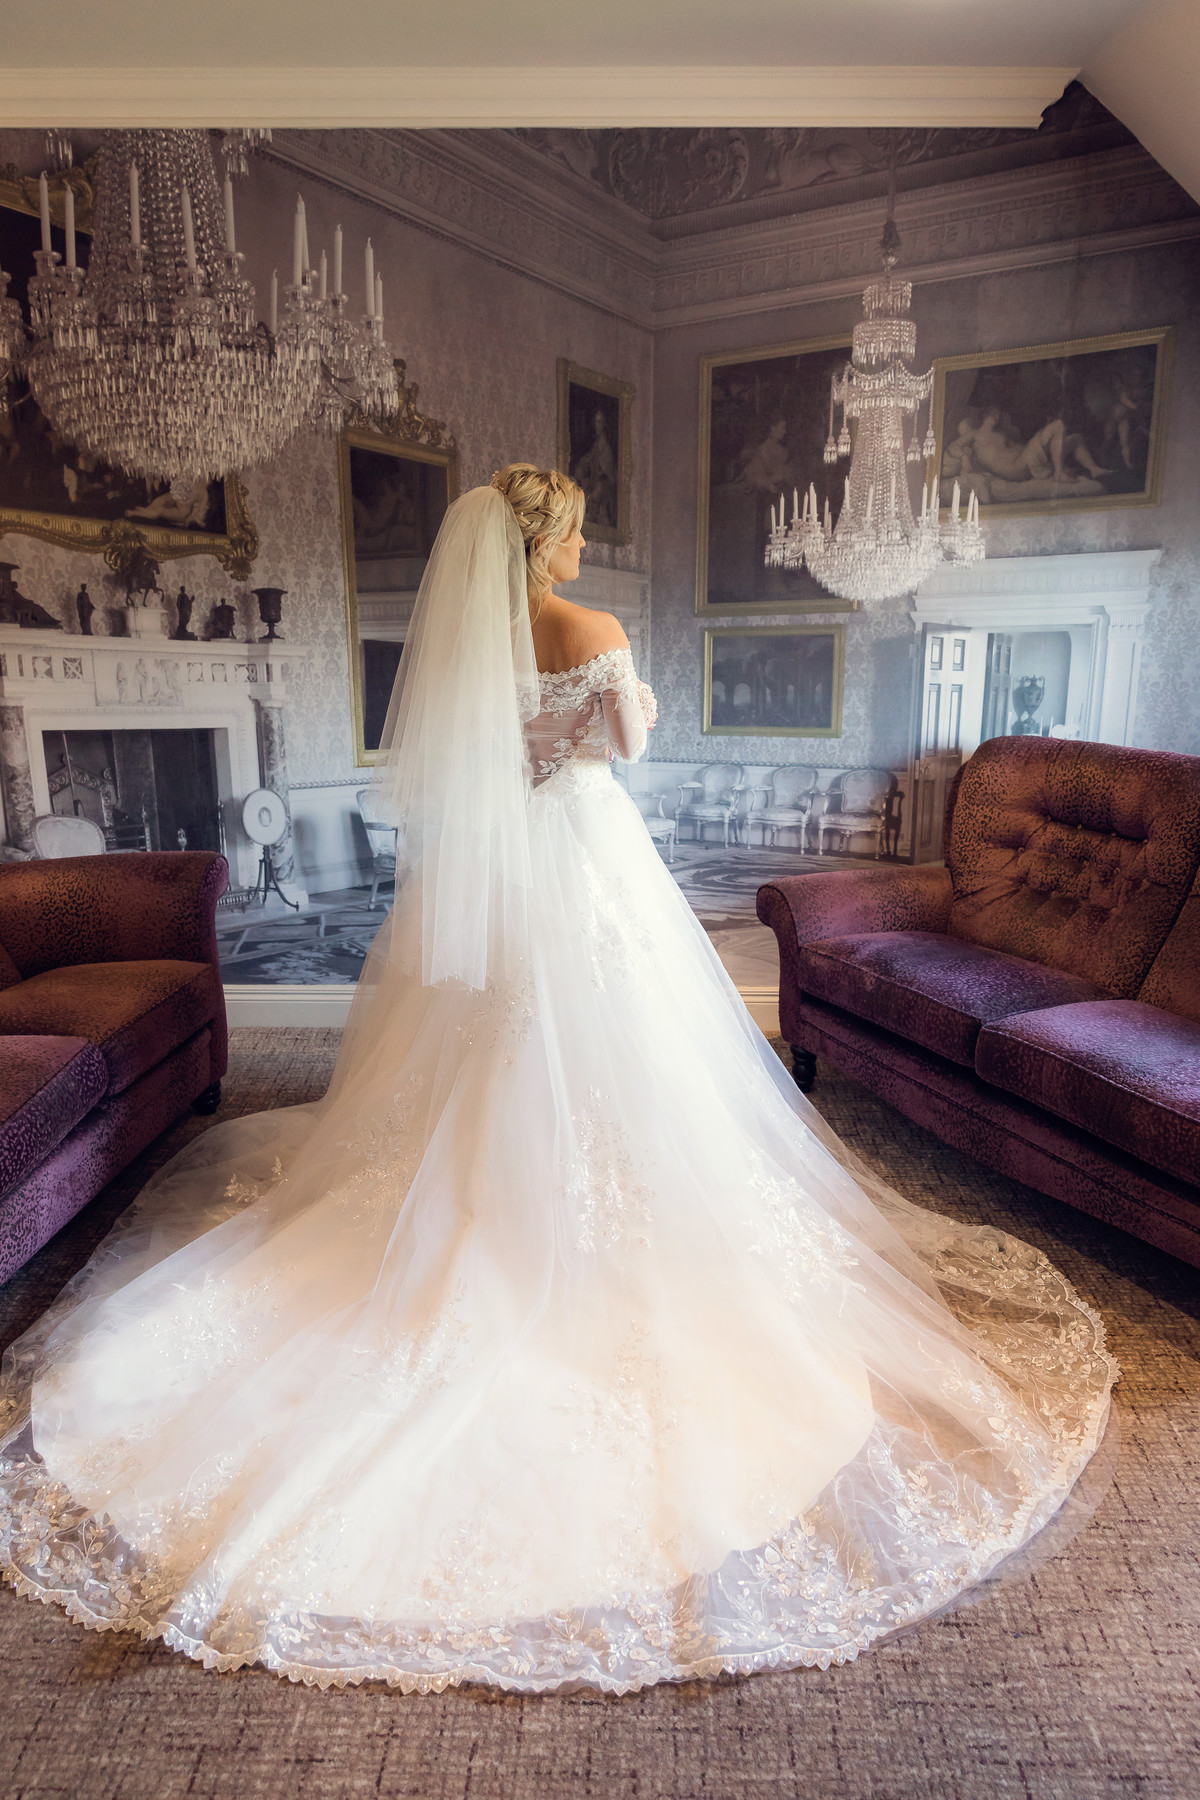 The Bridal suite at the moat house photography